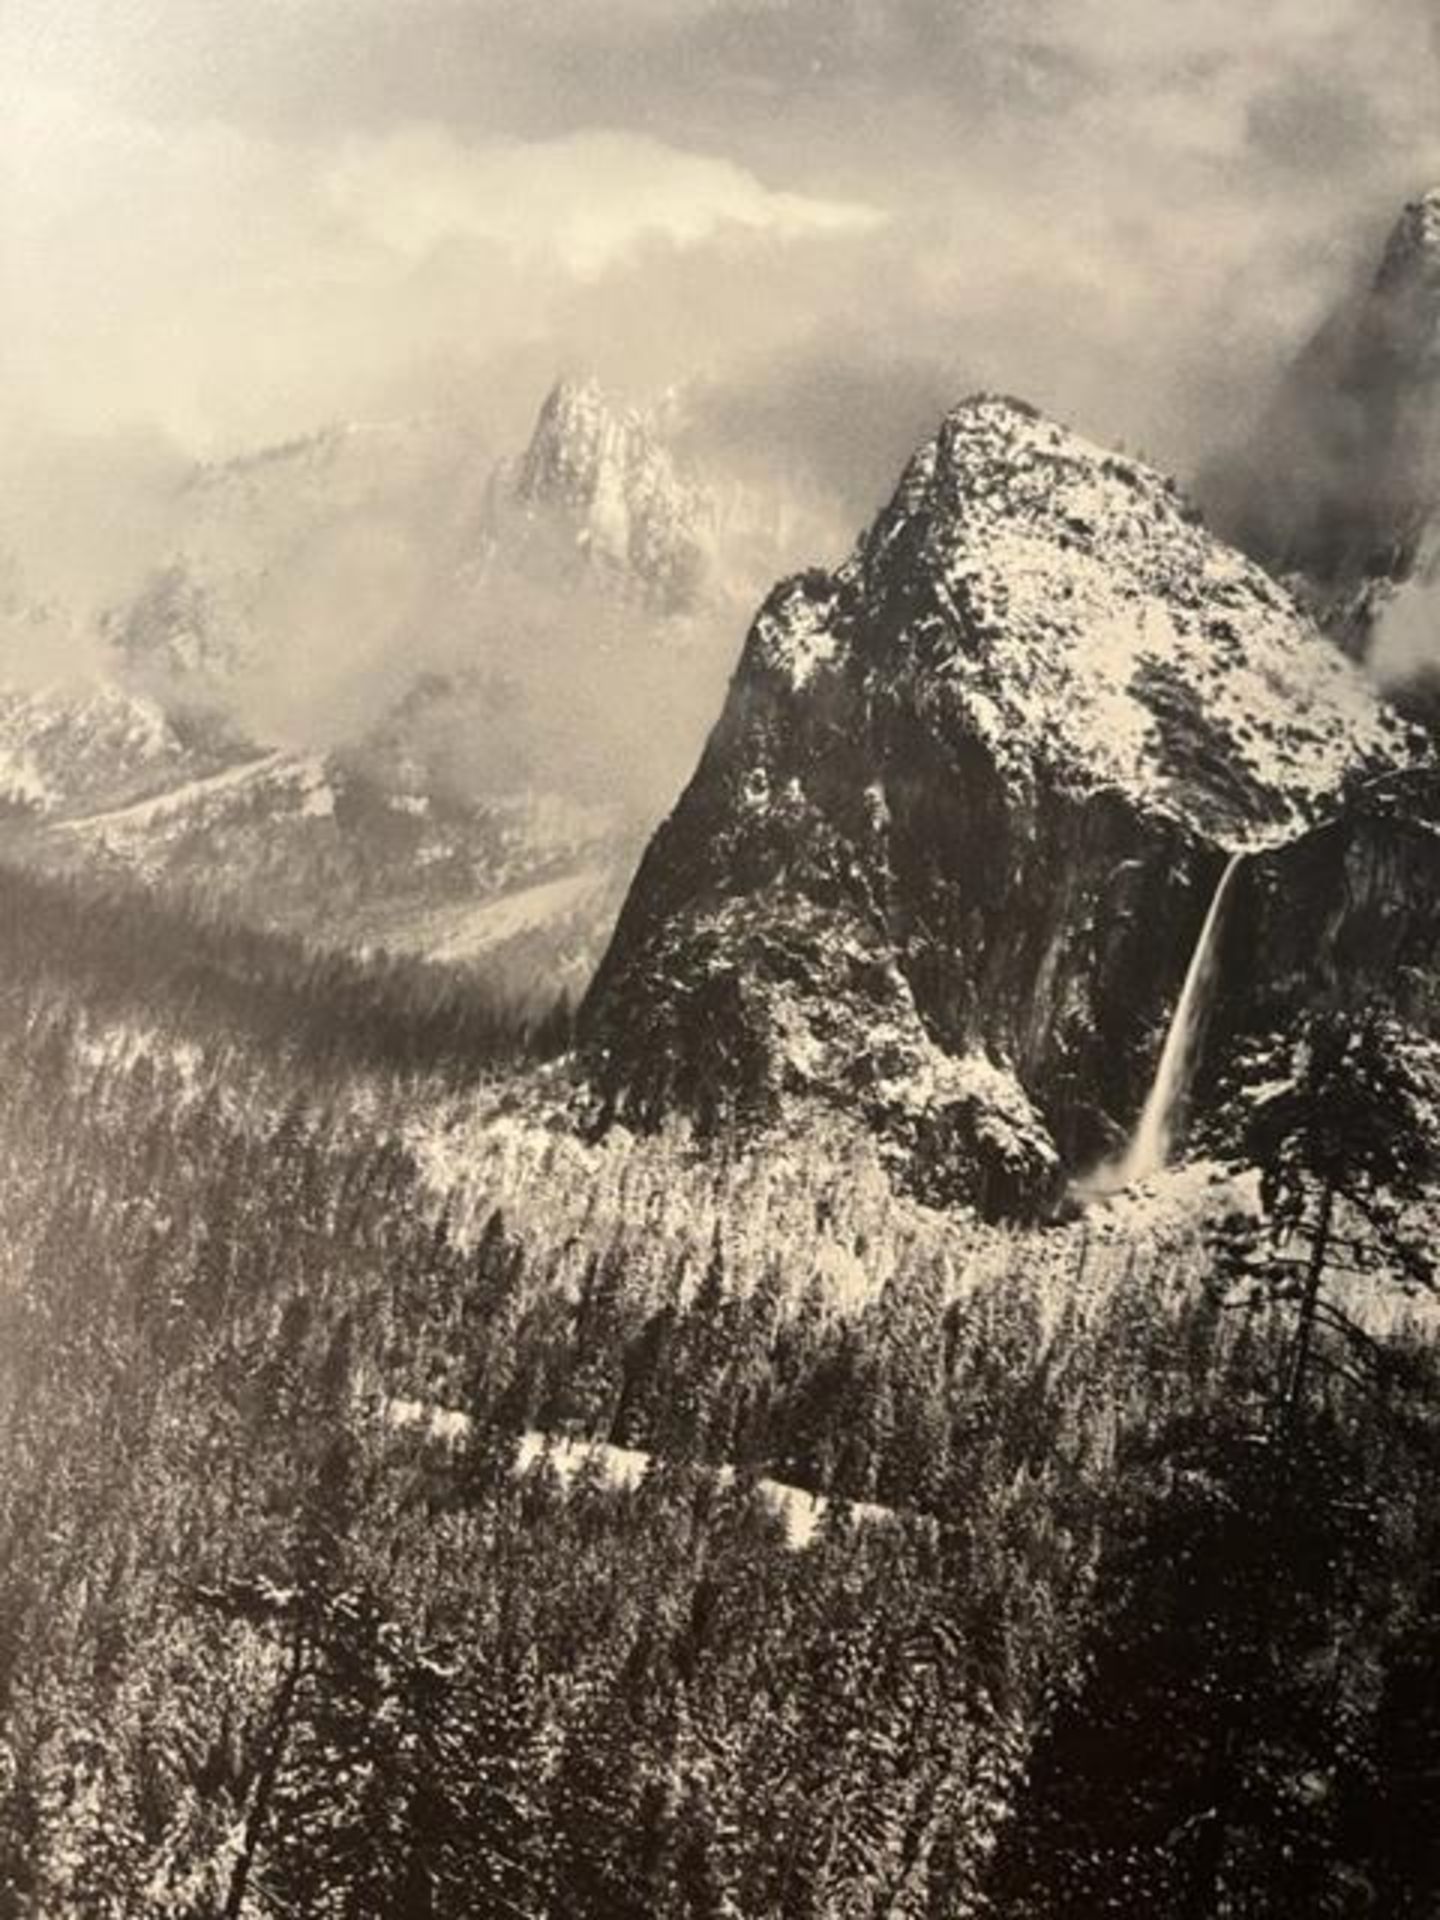 Ansel Adams "Clearing Winter Storm" Print. - Image 6 of 6